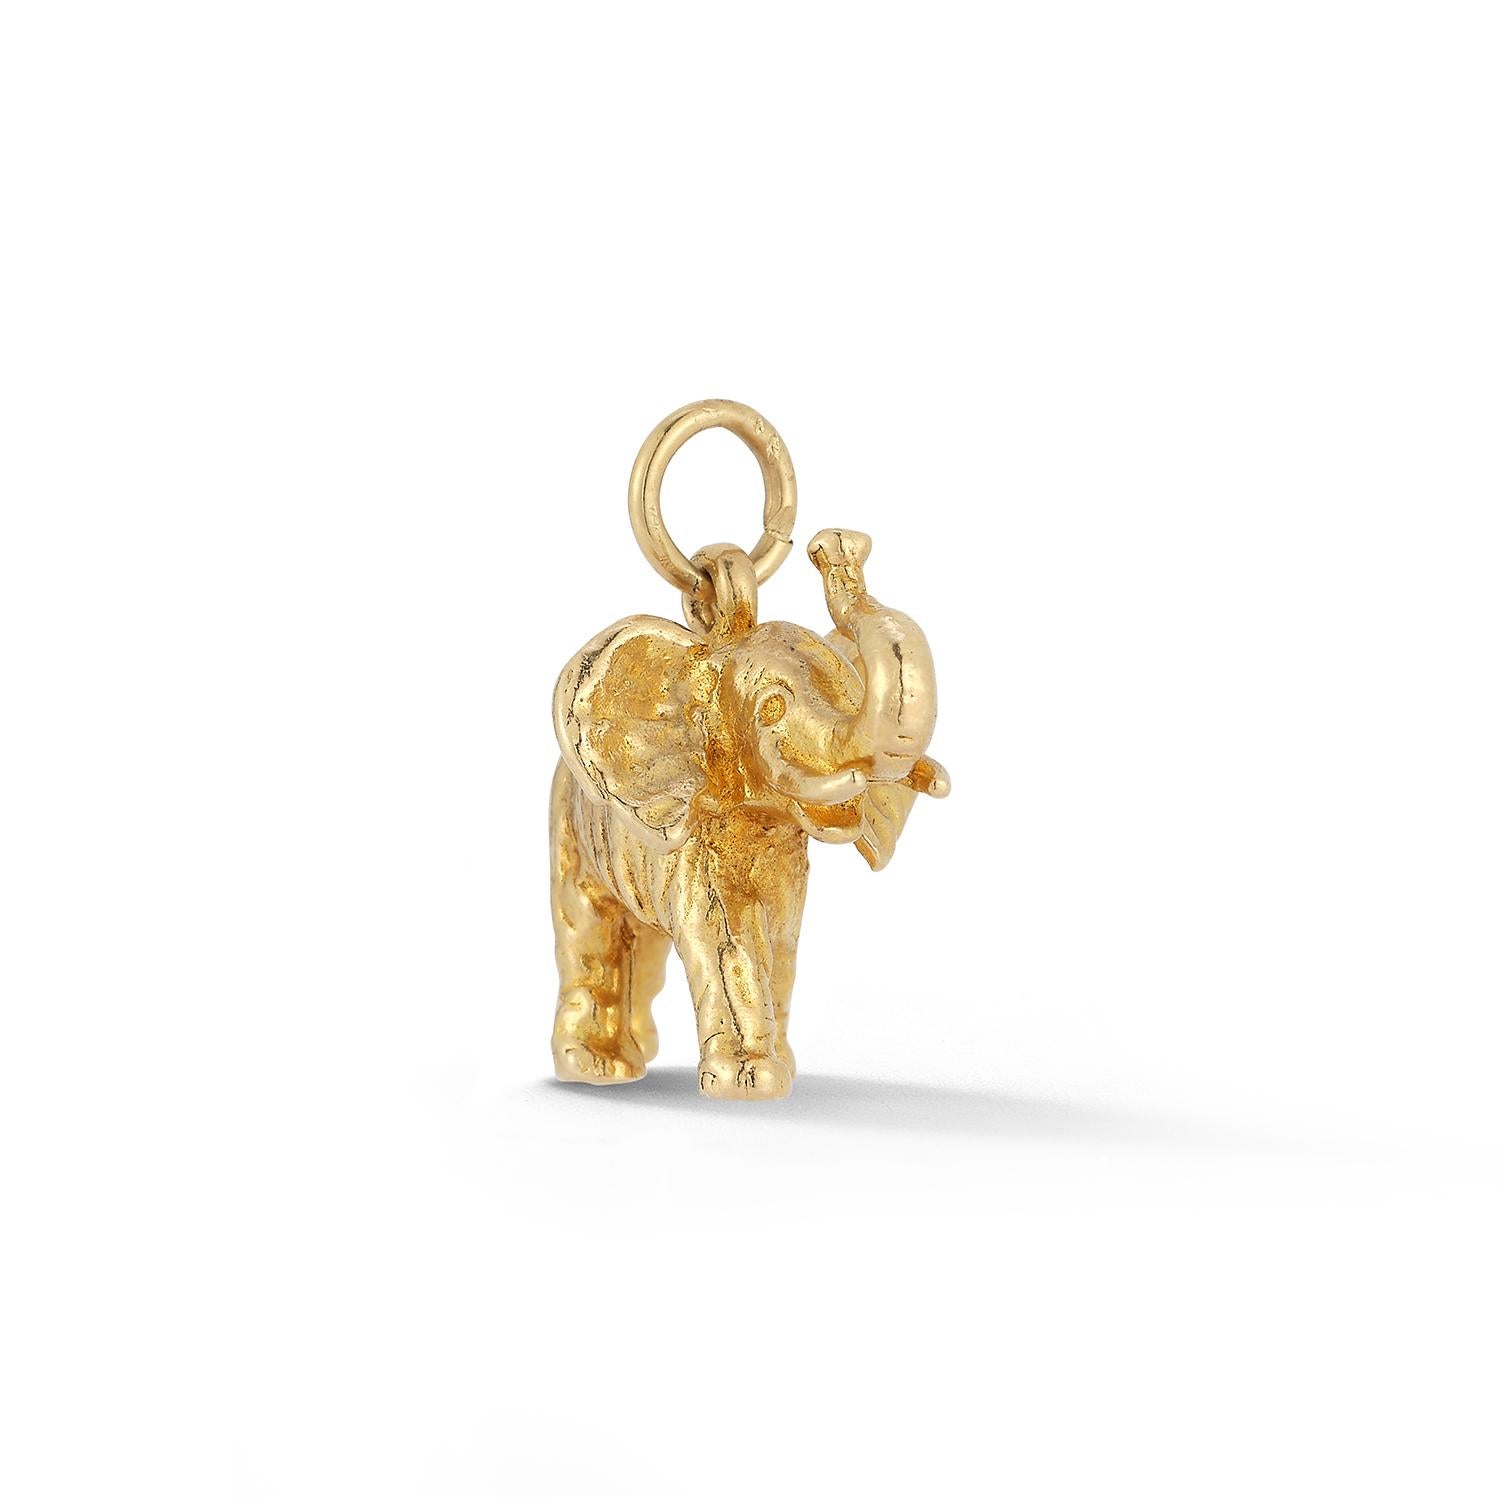 A large solid gold and detailed elephant charm with its trunk pointed upward for good luck. 

We also have a smaller version for mother and child as seen in the photos. 

Wear it on a chain or add it to a favorite charm bracelet. 

1